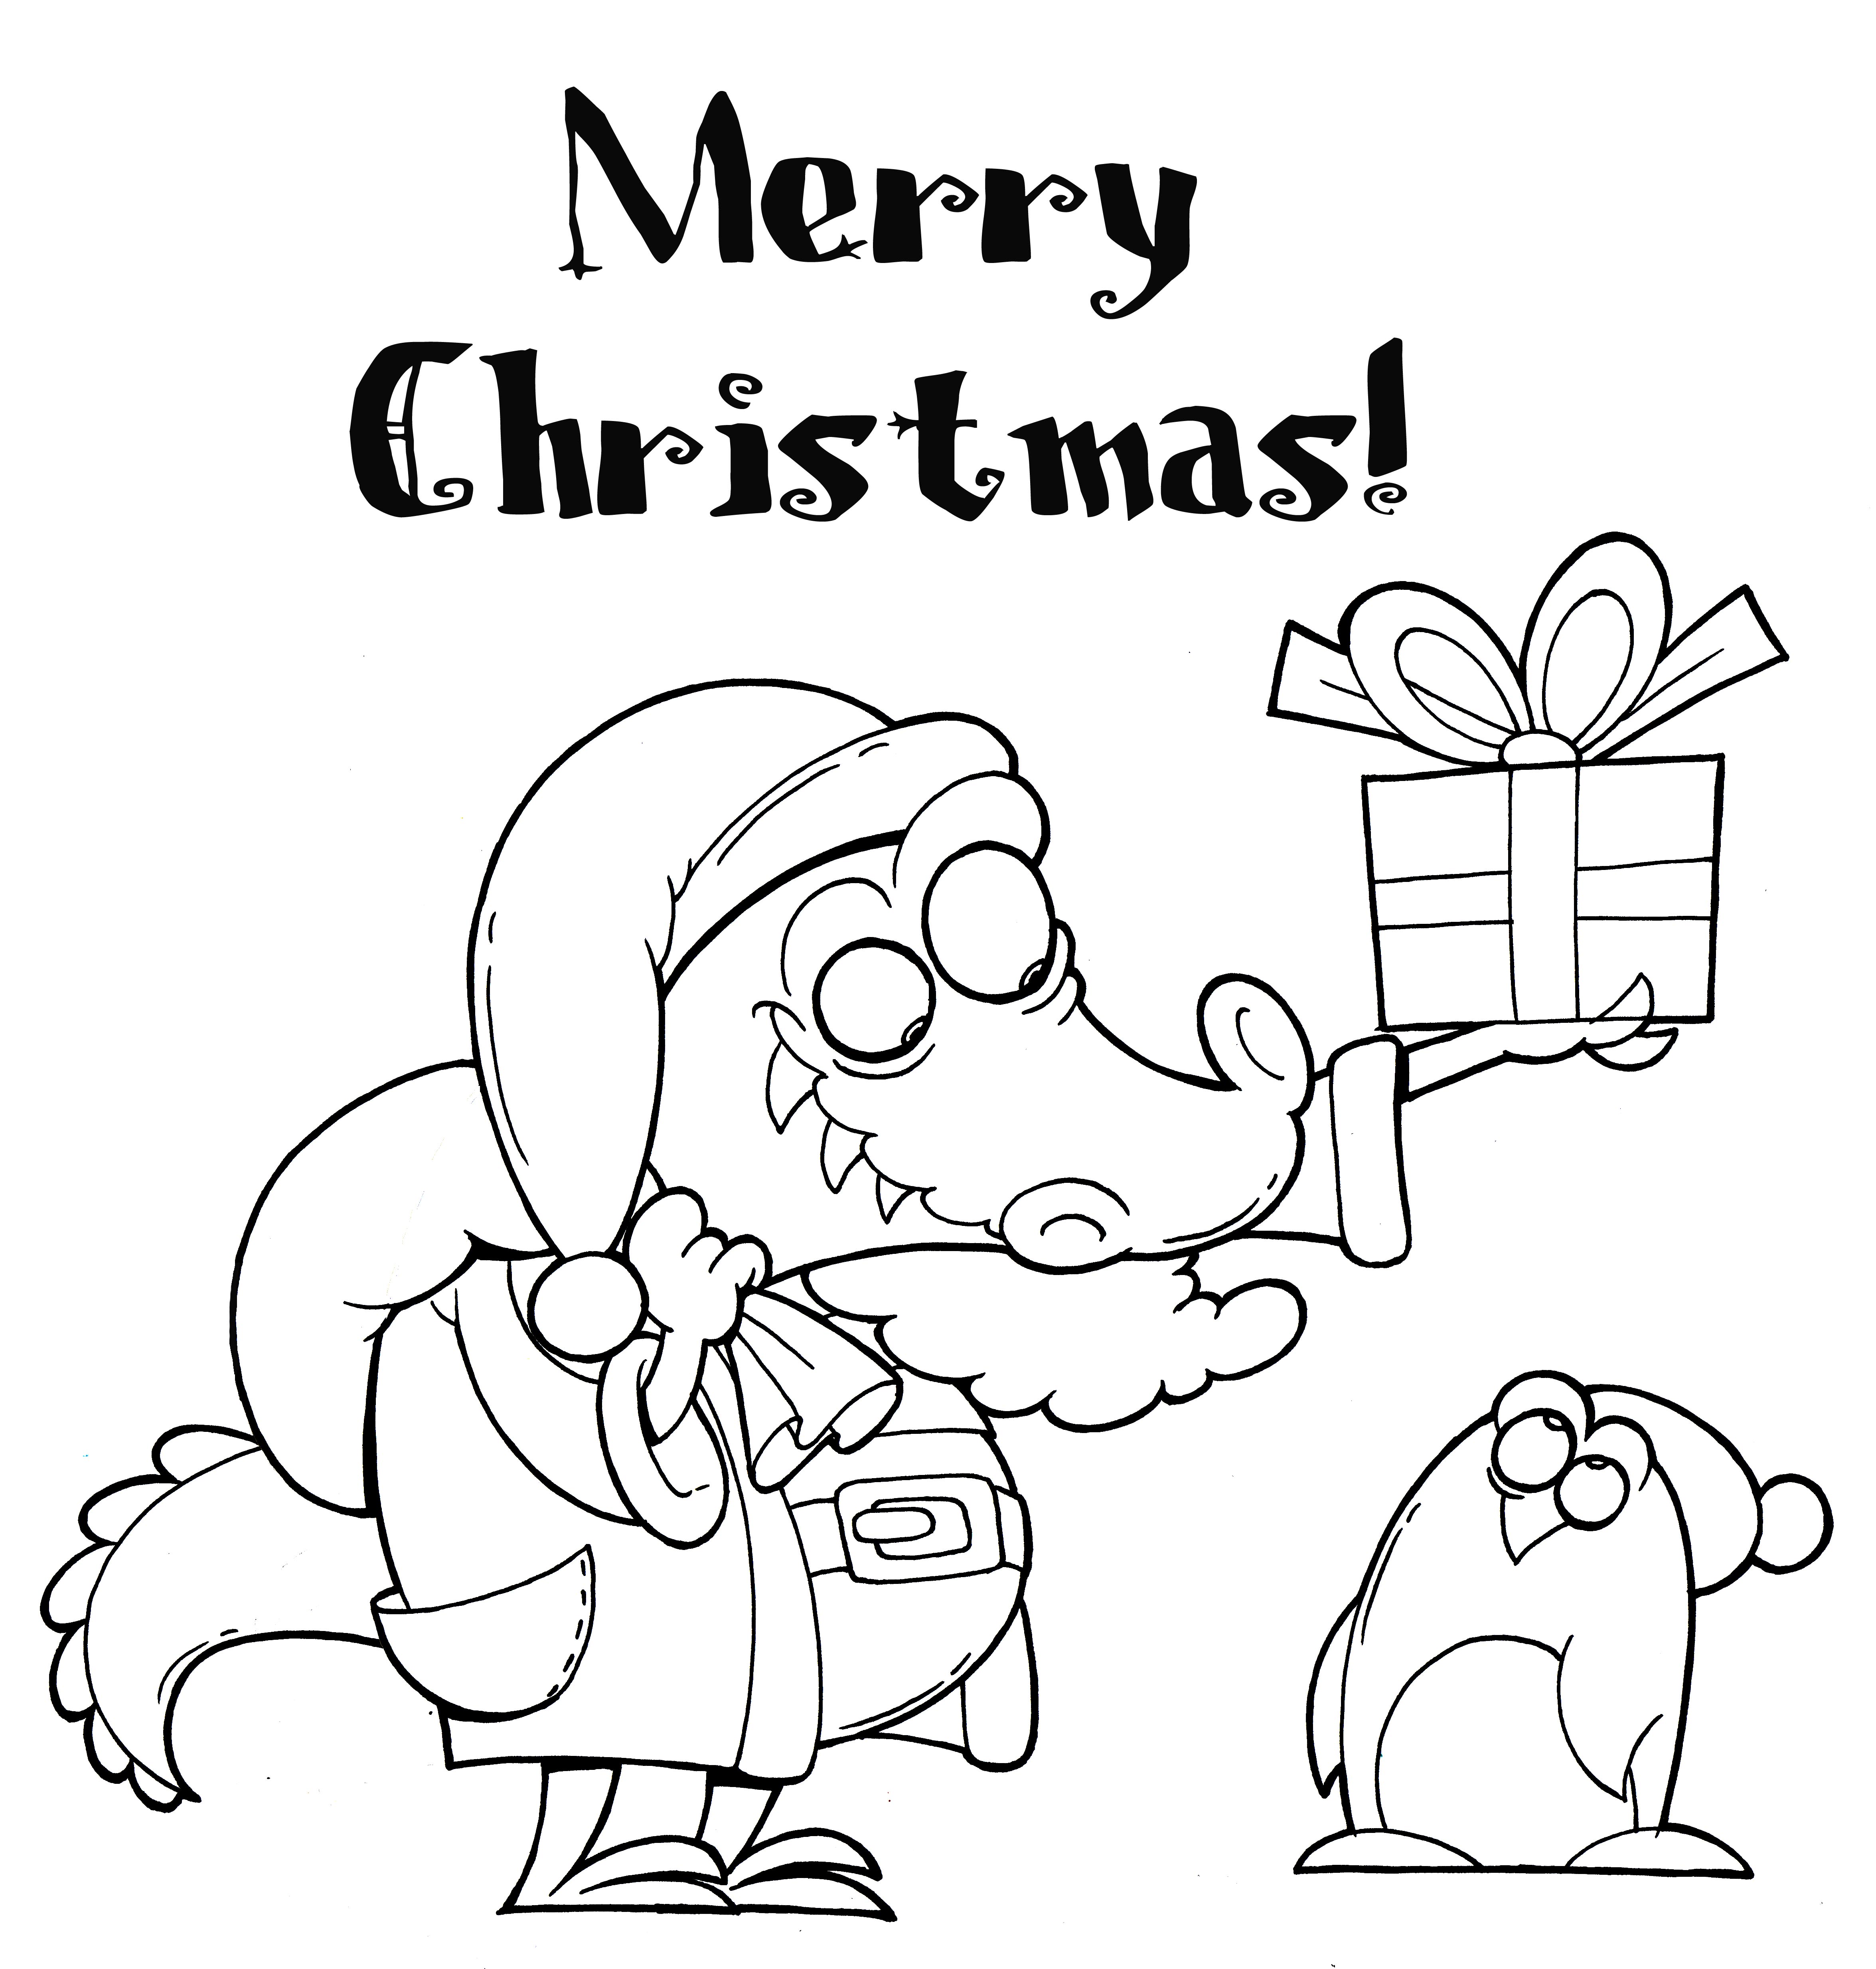 Santa Claus Is Coming To Town Coloring Pages at ...